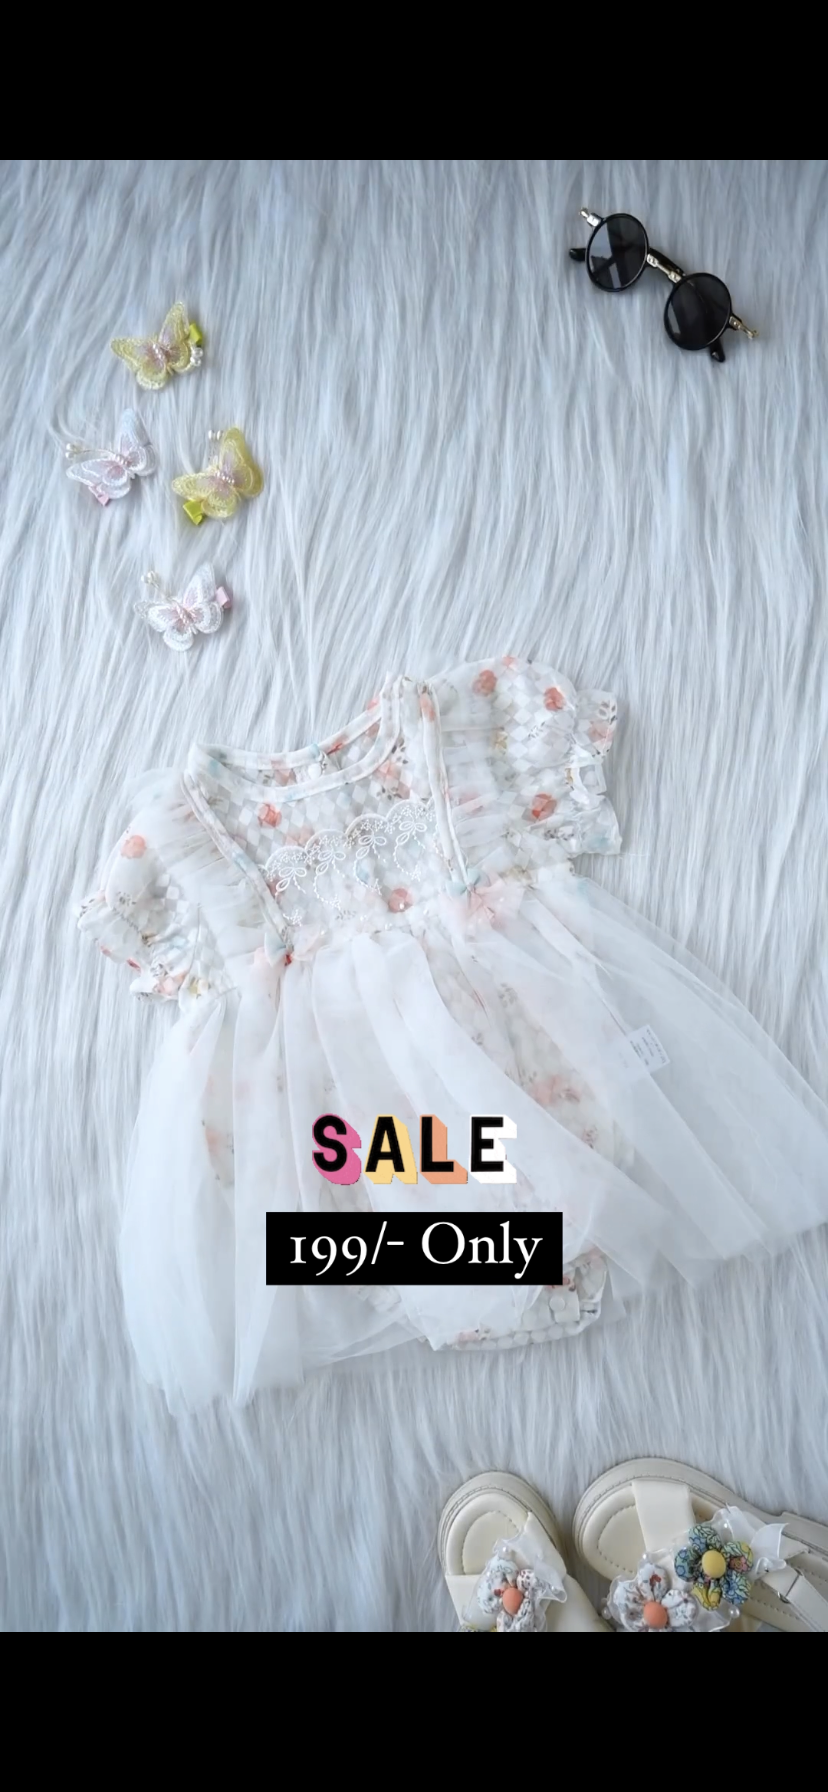 Off White Embroidered Skirt For Kids On Sale